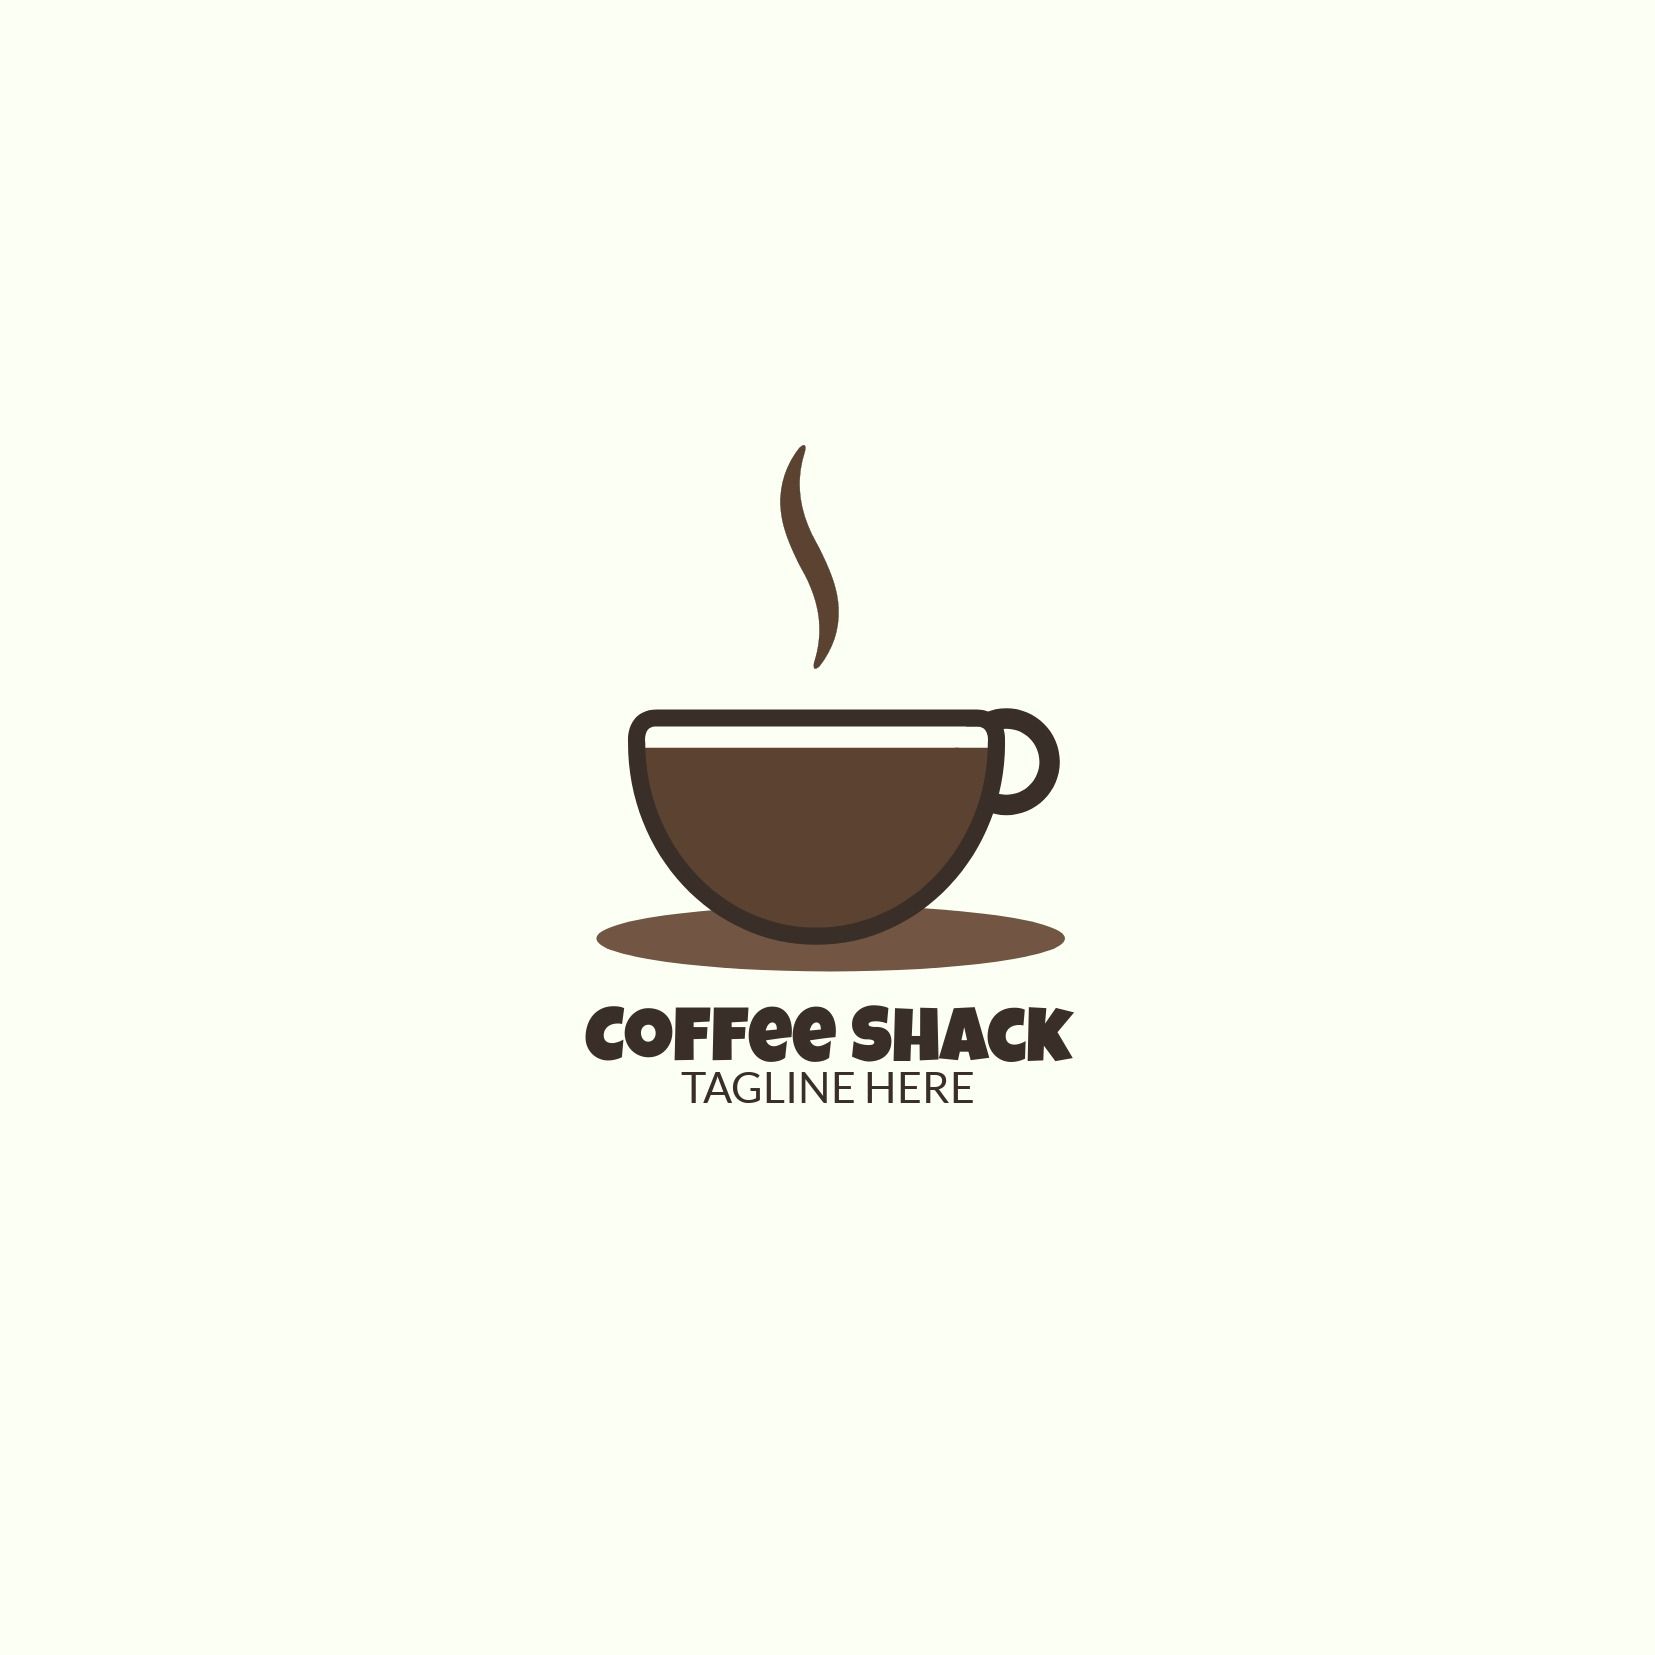 Coffee shop logo - Luckiest Guy is one of the best typefaces for youth logos - Image